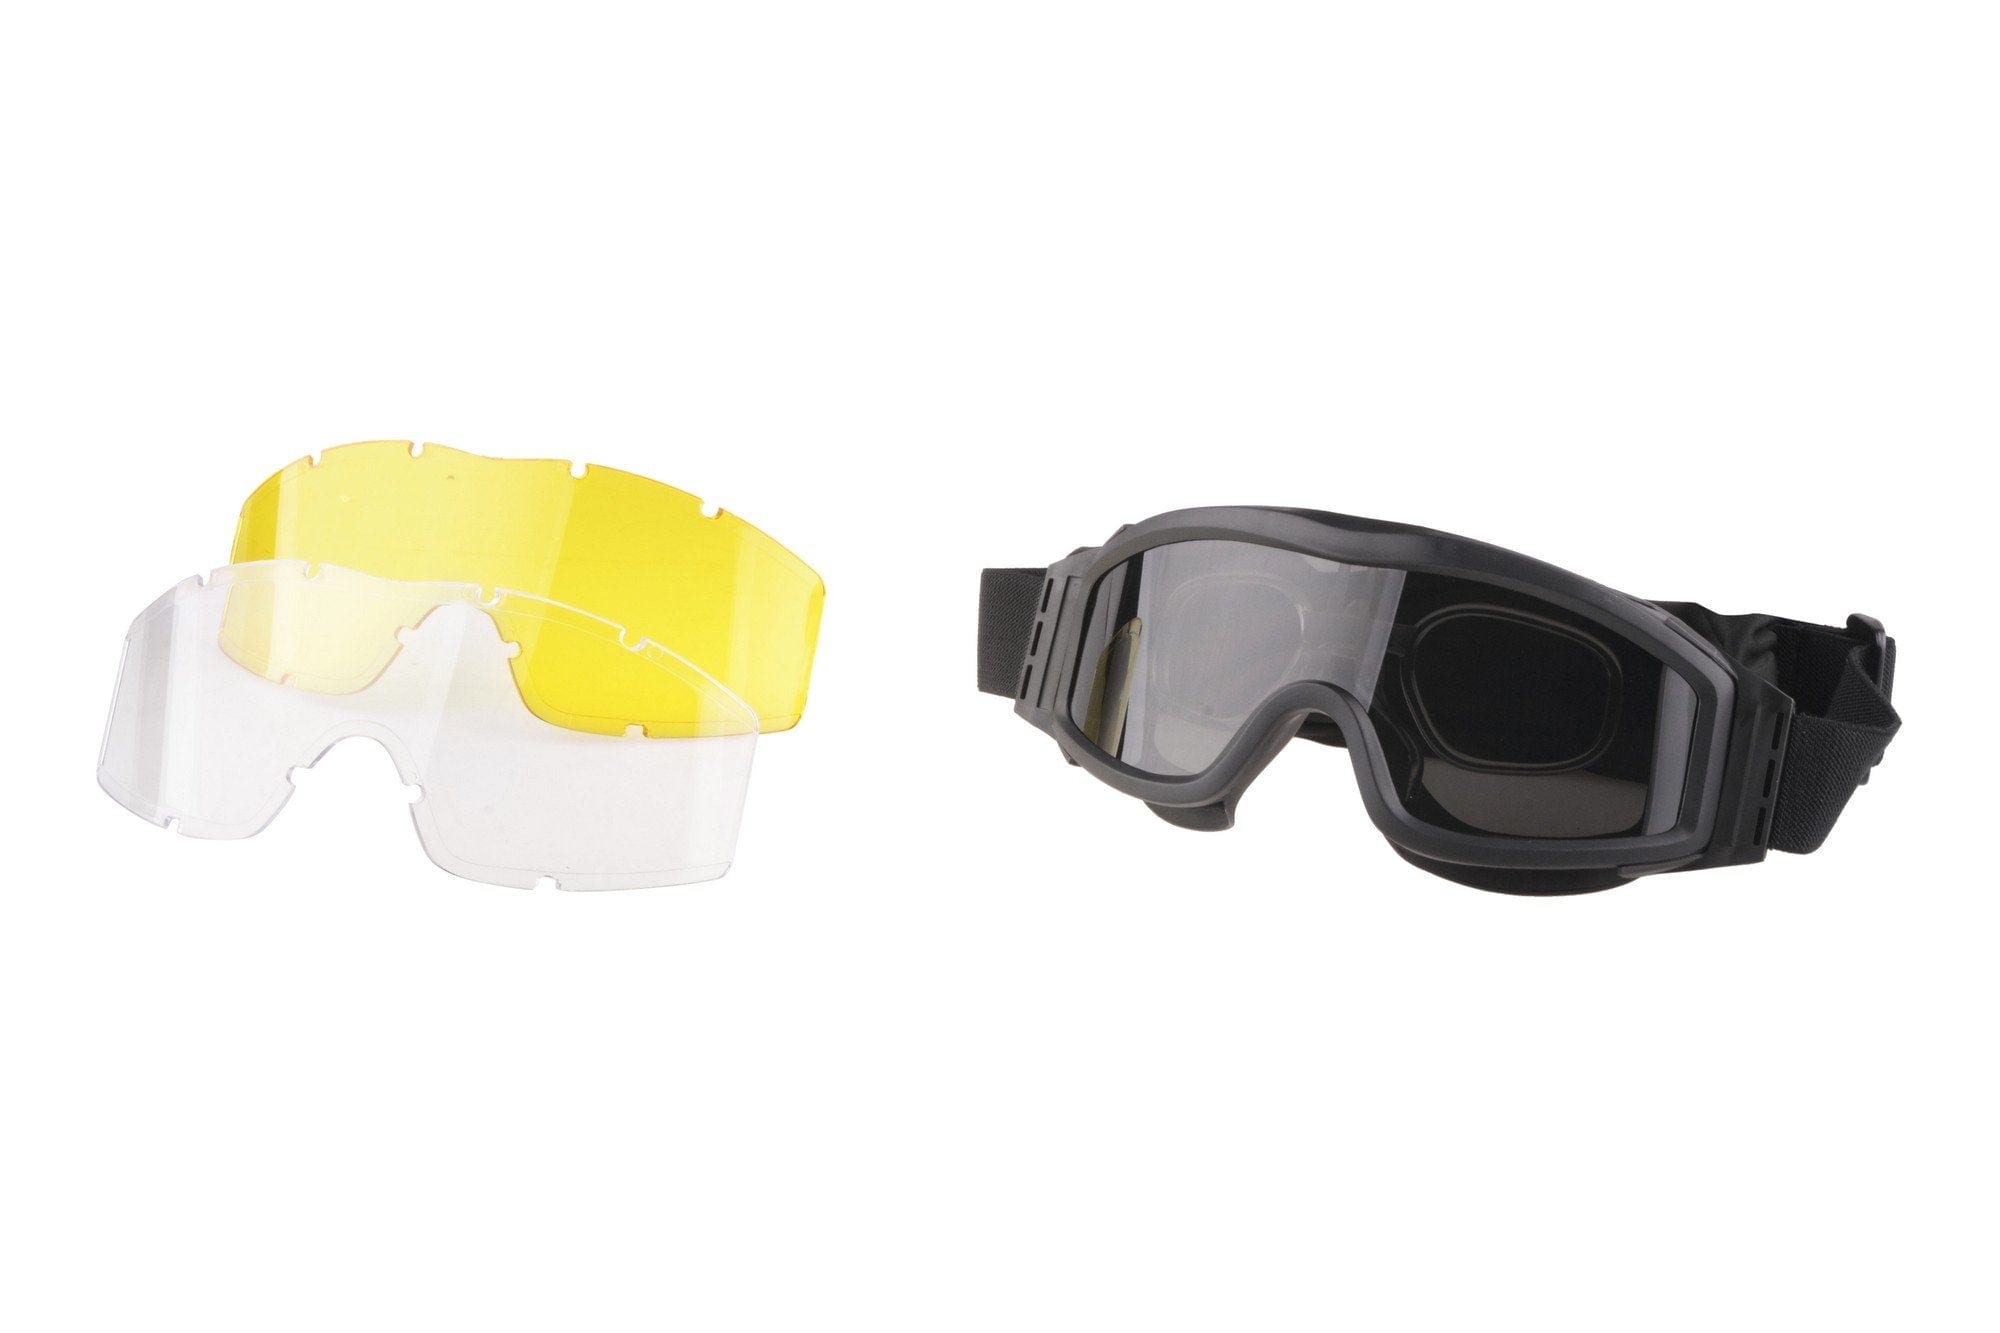 V-TAC Tango Goggles - Black by Valken on Airsoft Mania Europe